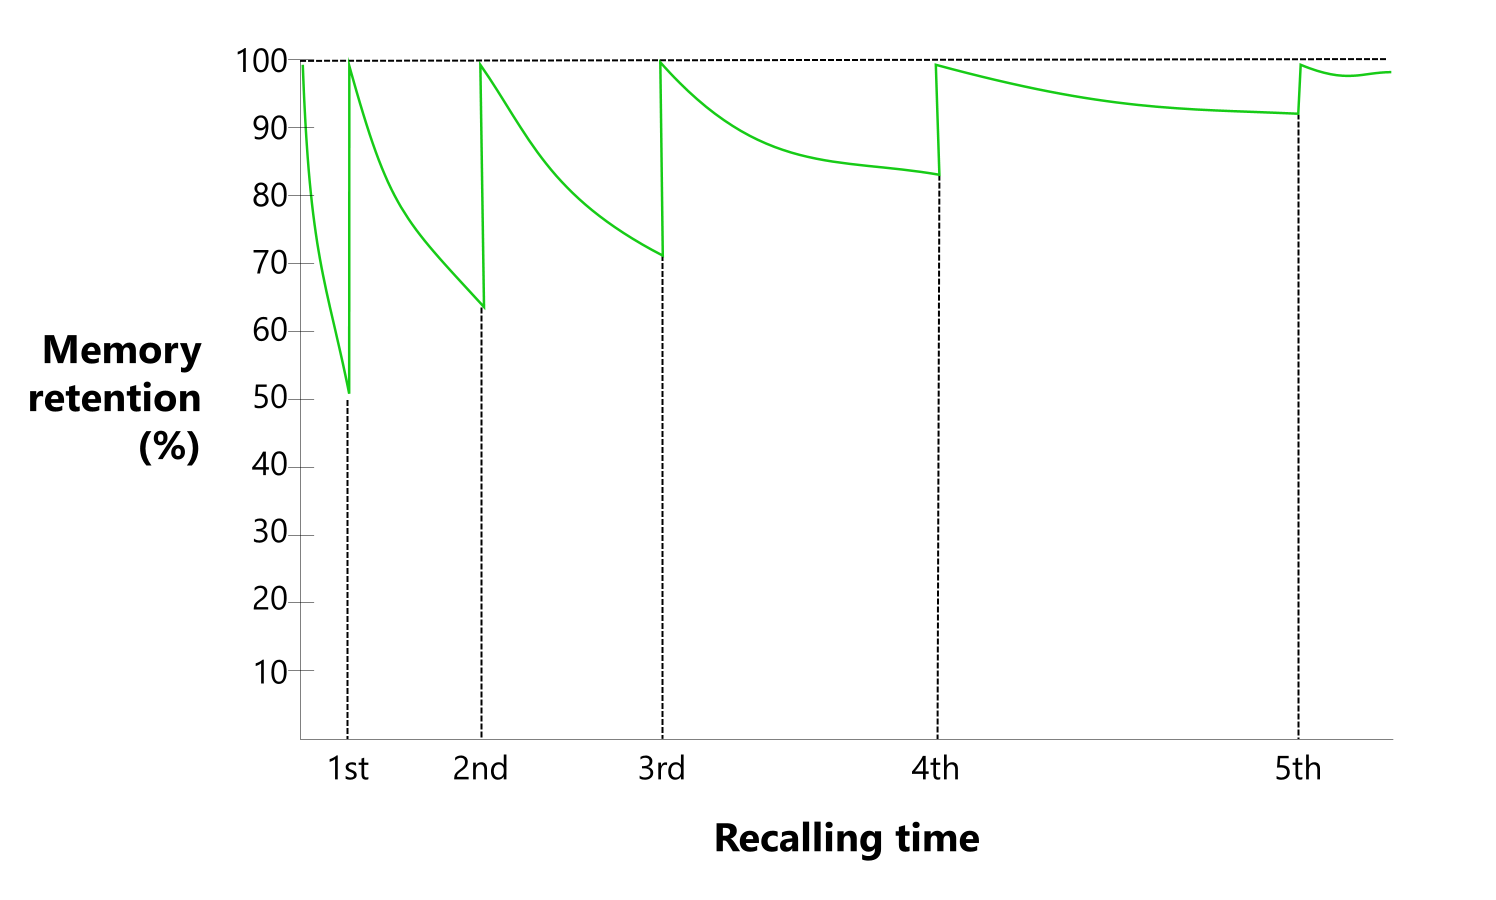 Graph. On the Y axis memory retention is mapped in percentage. Recalling time is mapped on the X axis. There is a peak for each recall time (1 to 5). The peaks get smaller each time indicating a lower percentage of recall as time passes.